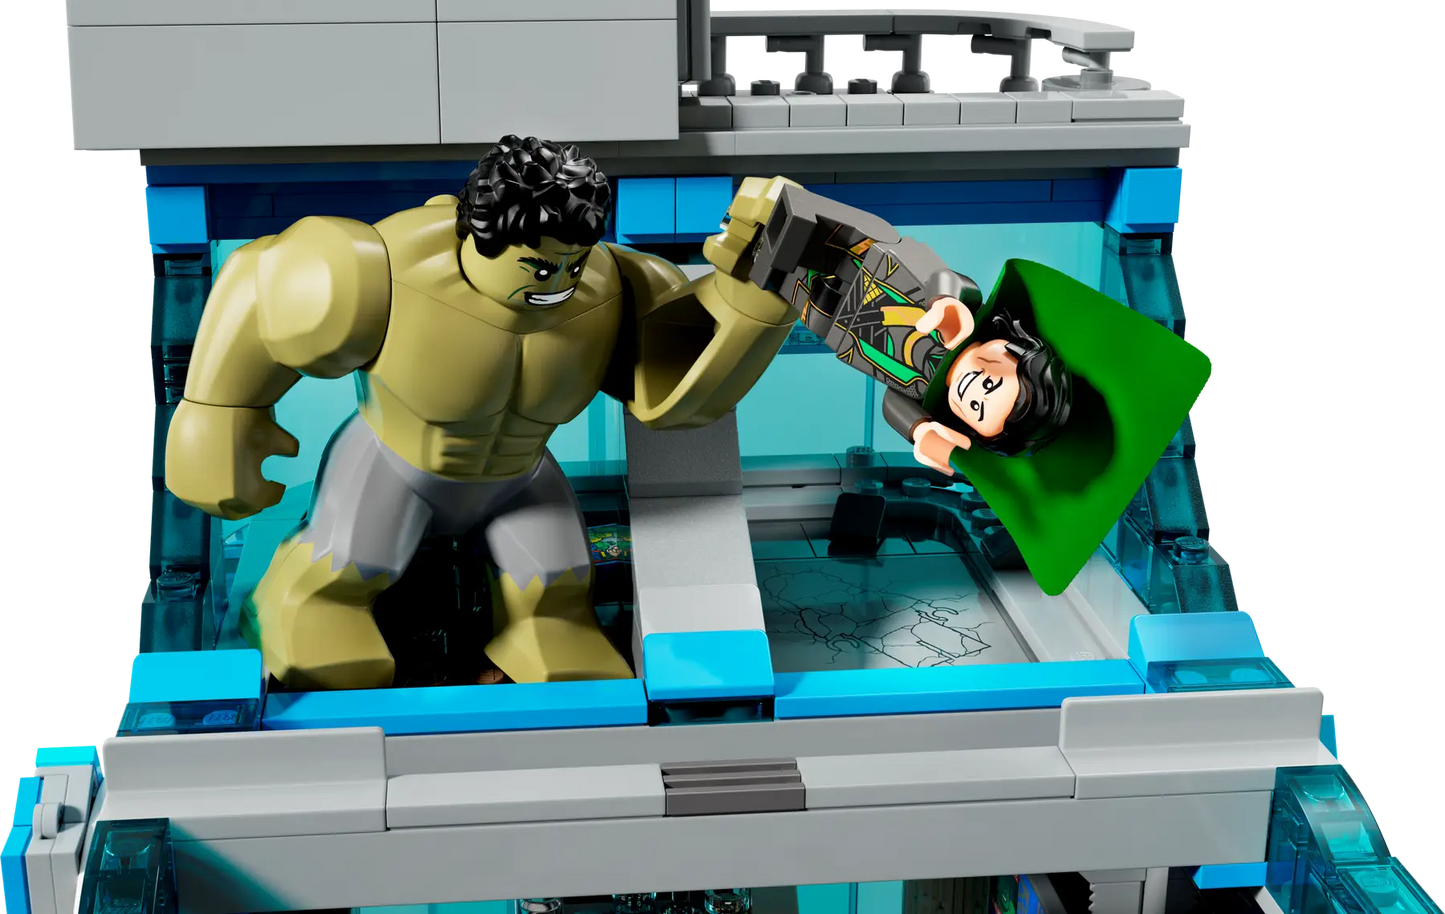 LEGO - Marvel - Avengers Tower - 76269 (Exclusive)